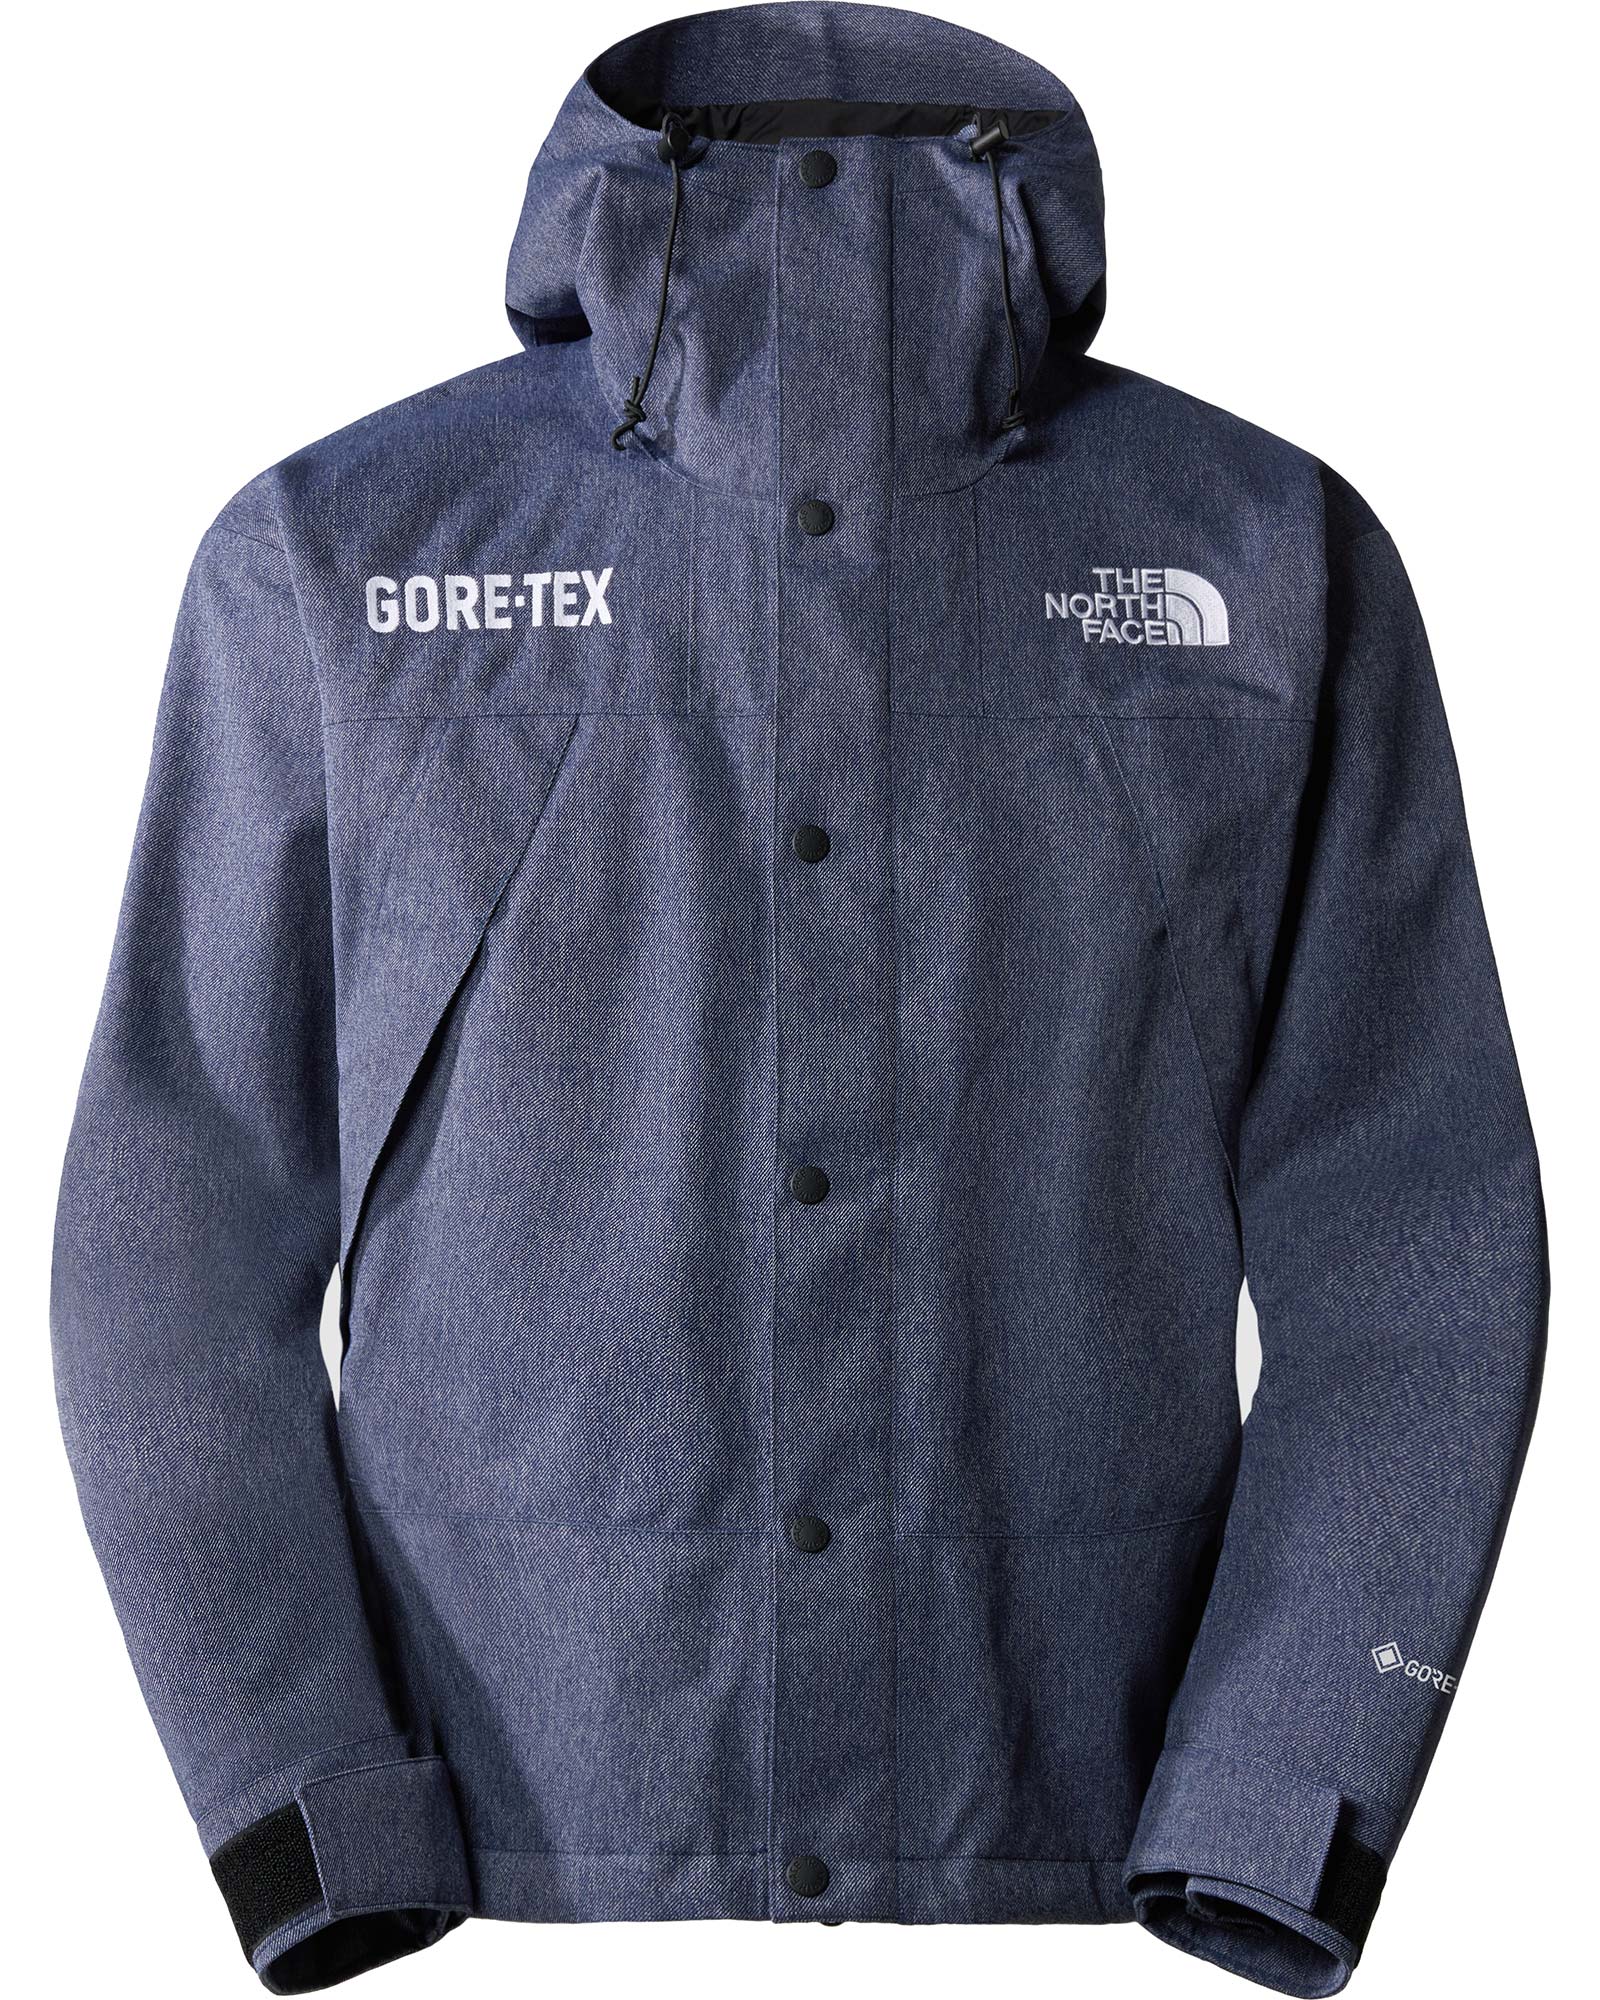 The North Face Men's Mountain GORE-TEX Jacket